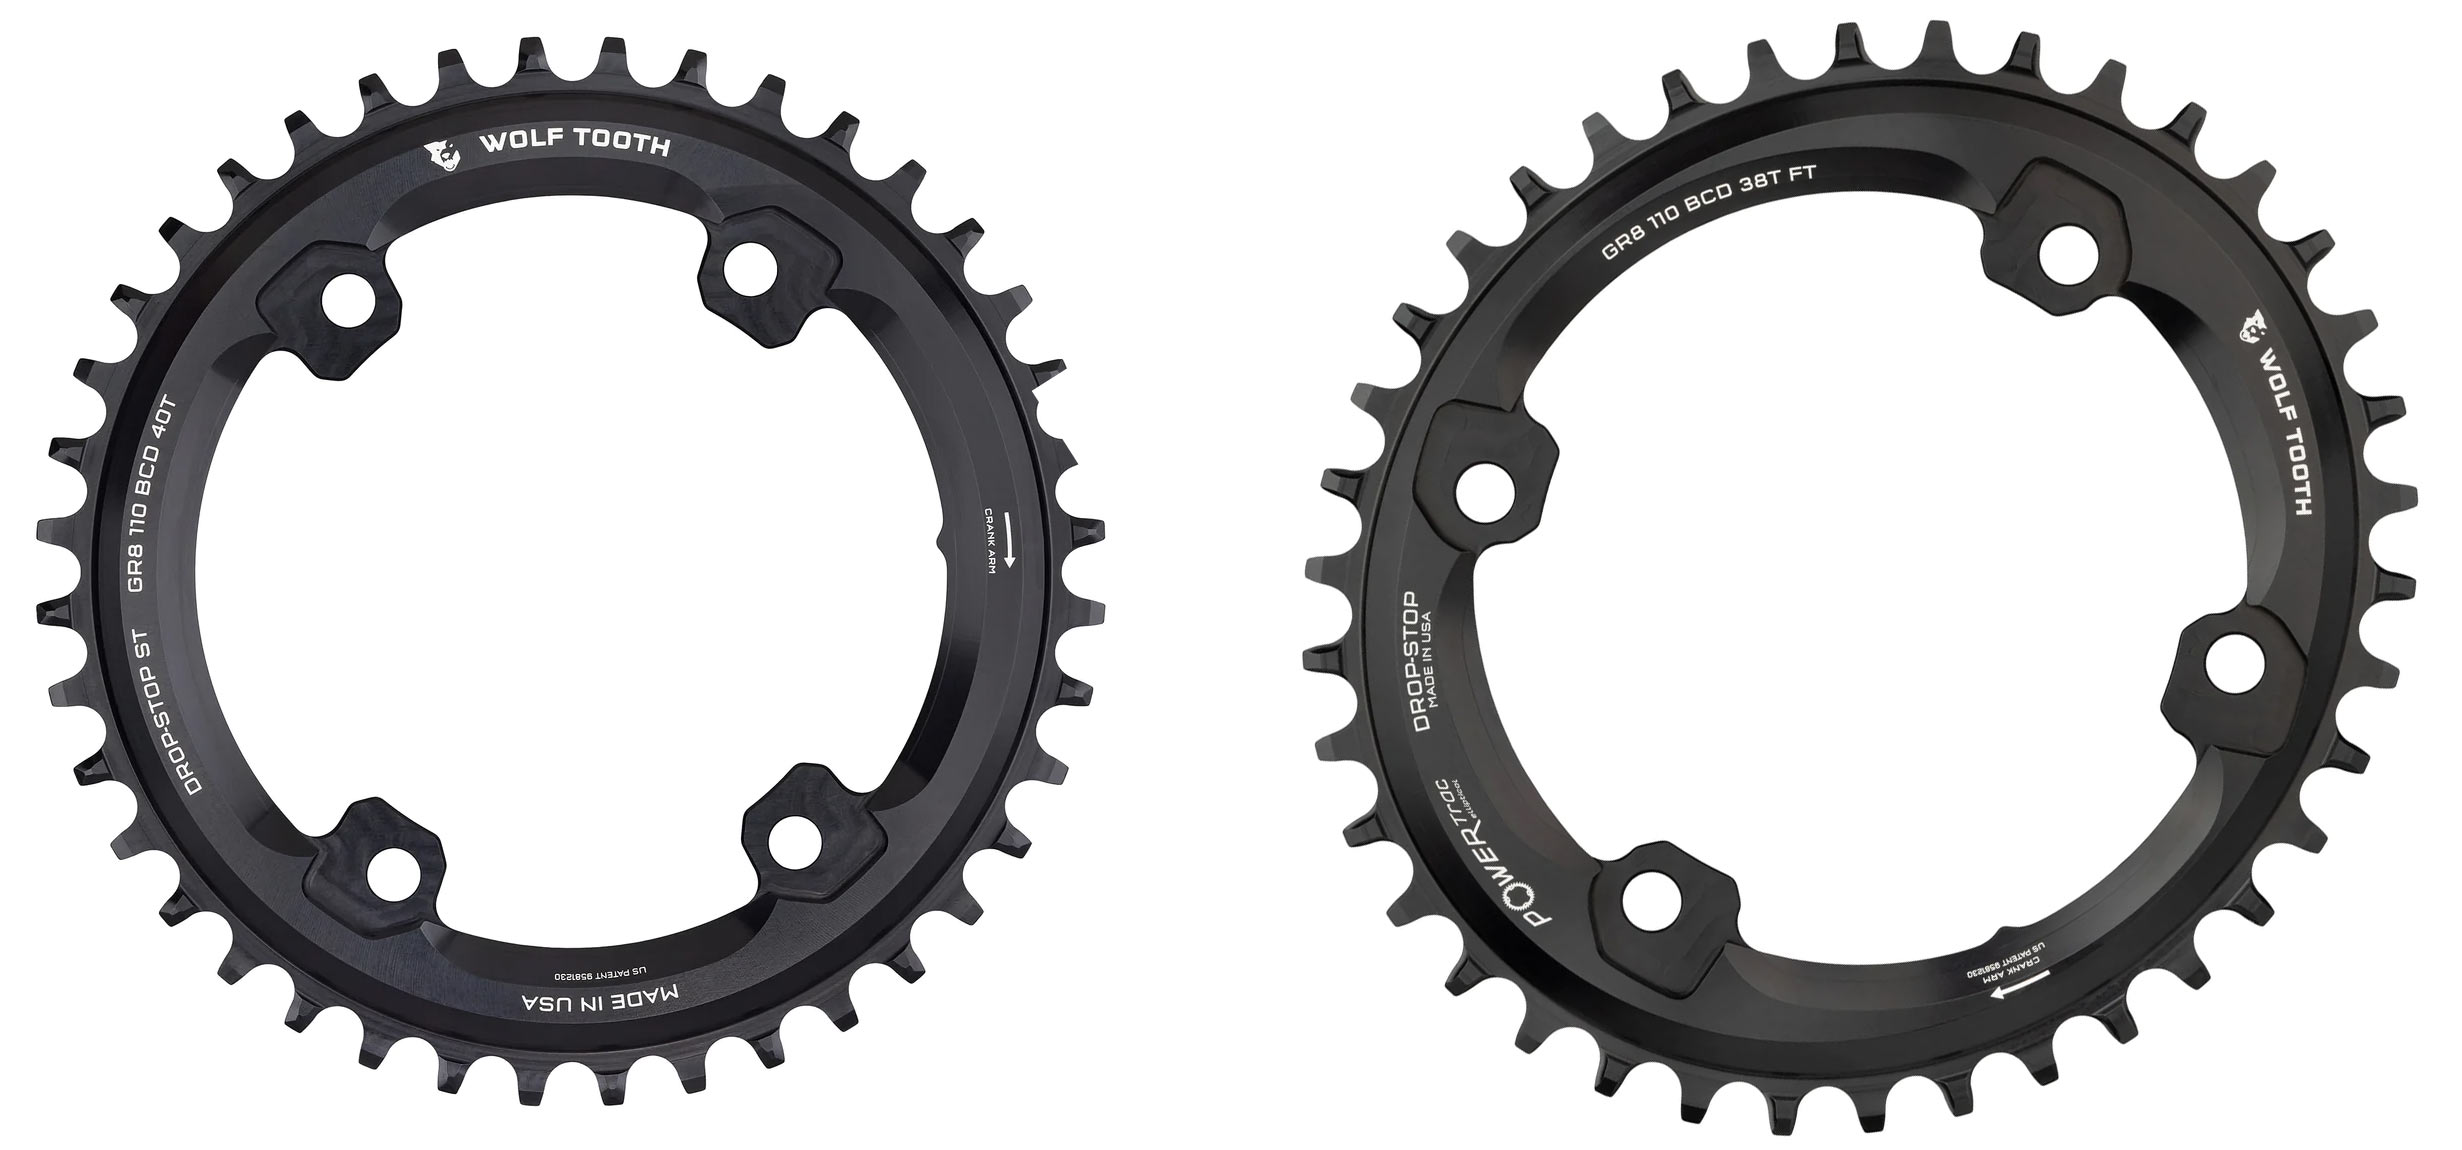 wolf tooth components chainrings for 12-speed shimano GRX